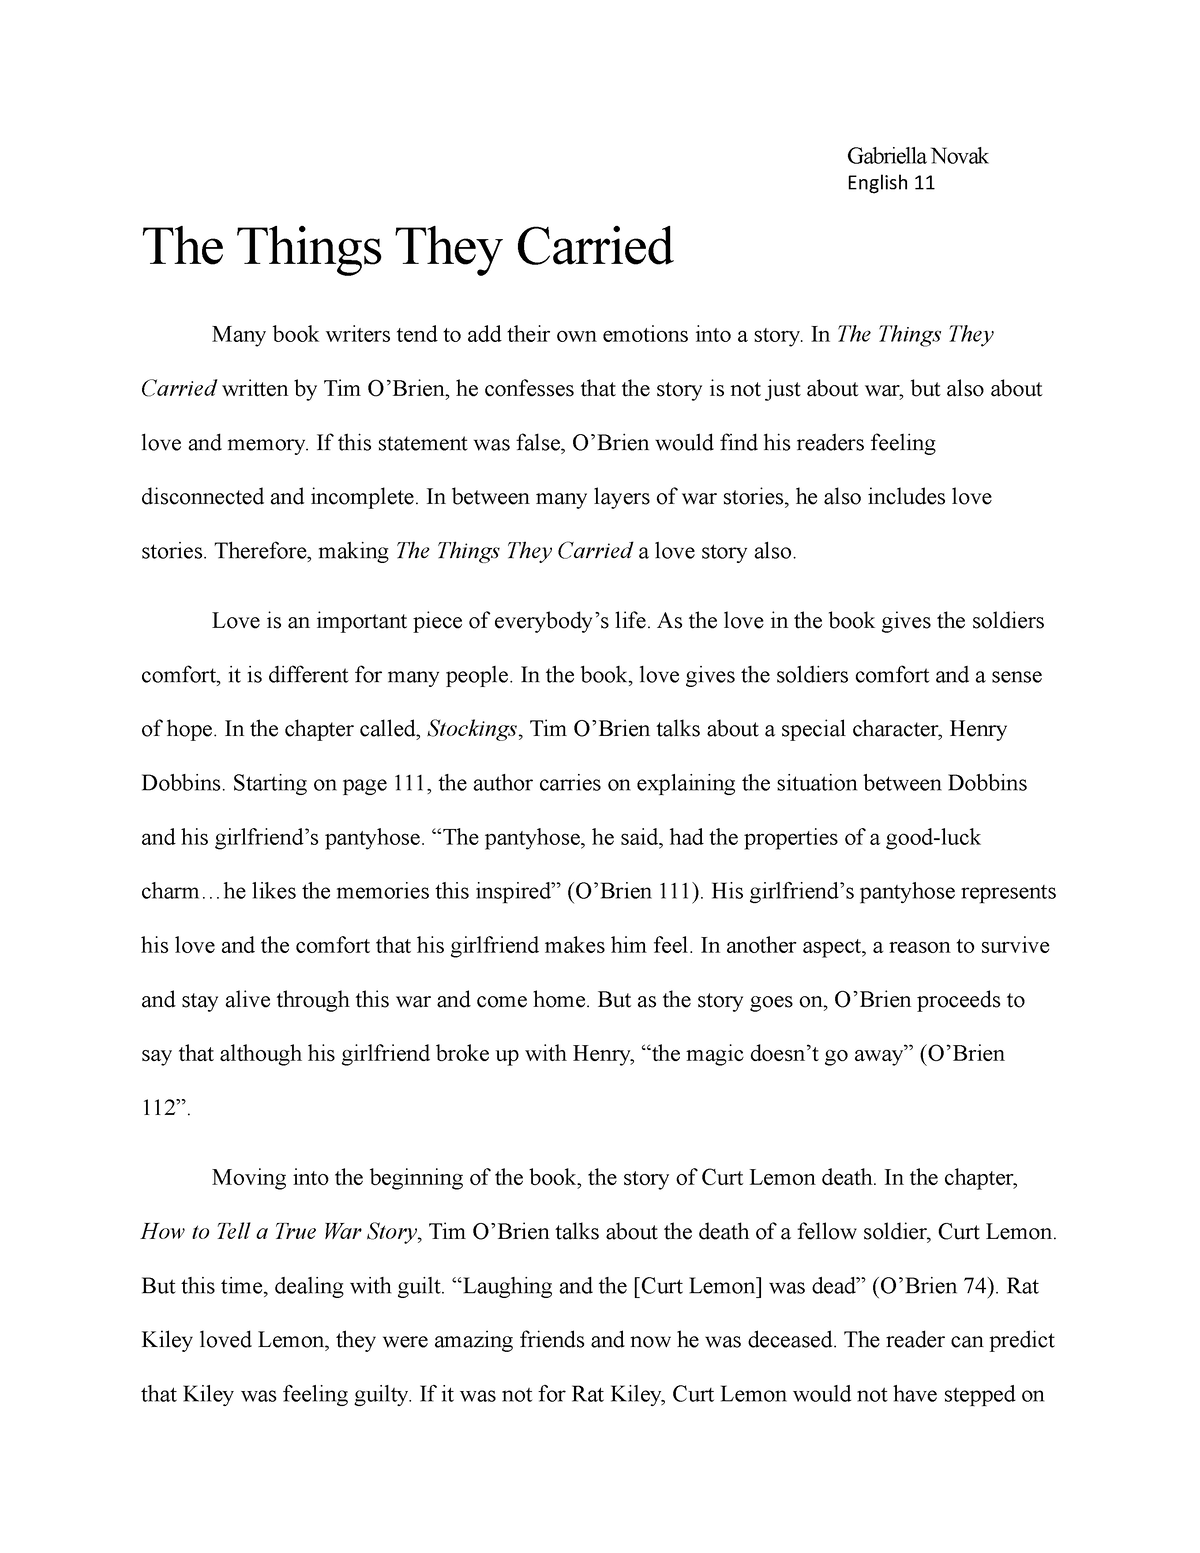 the things they carried essay hook